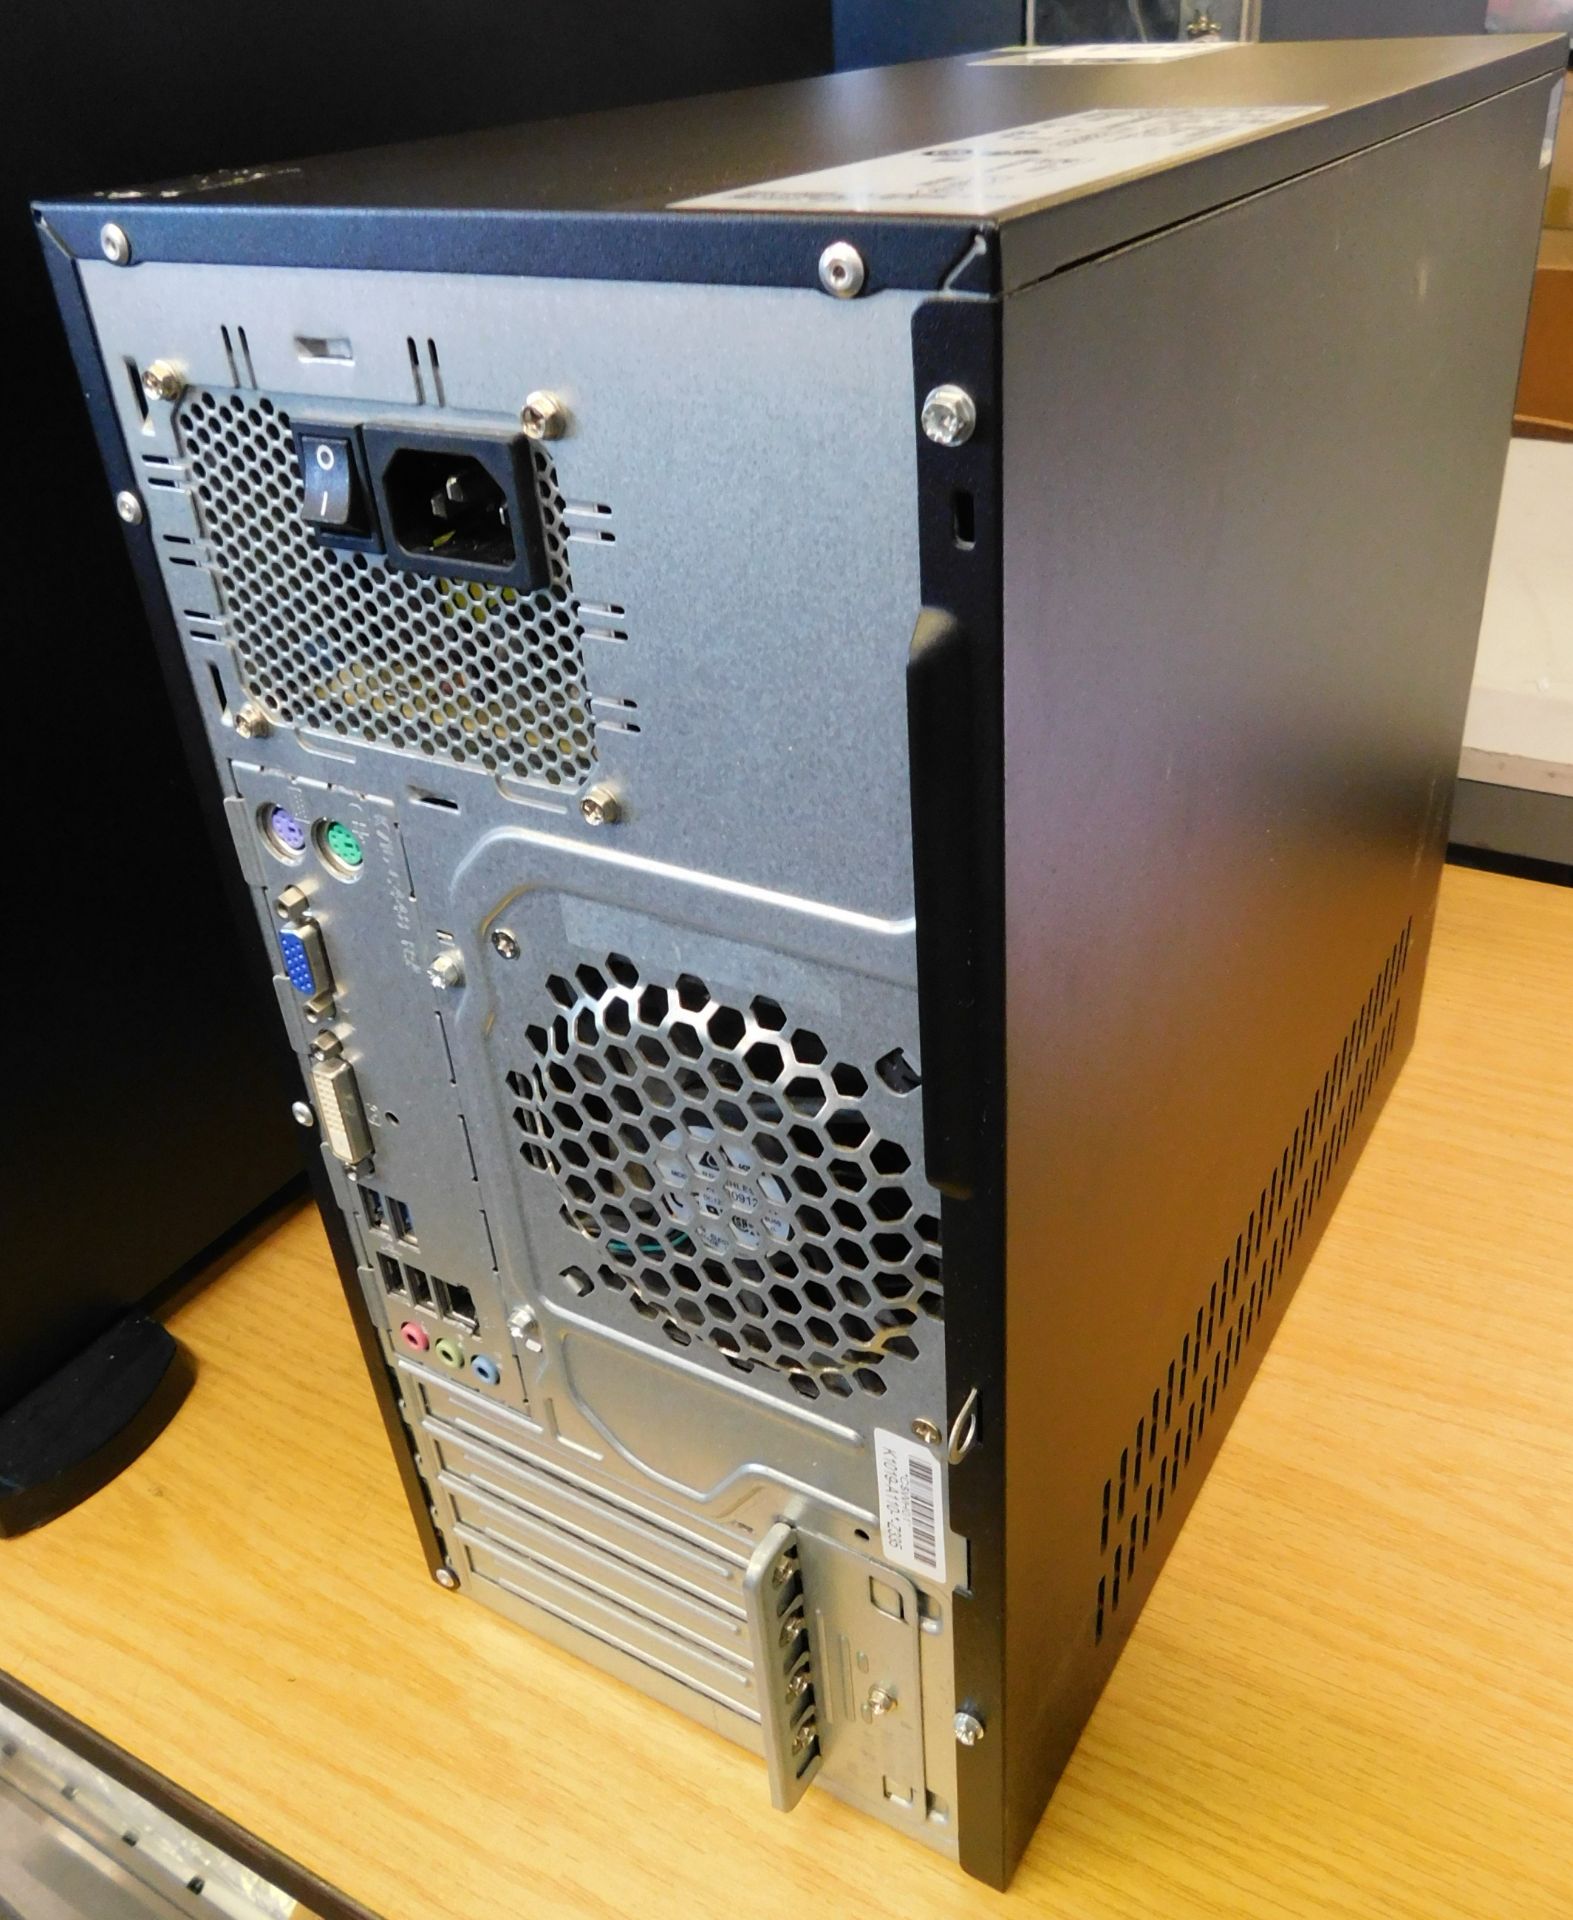 Fujitsu Esprimo P420 E85+ PC (No HDD) (Location: Stockport. Please Refer to General Notes) - Image 3 of 4